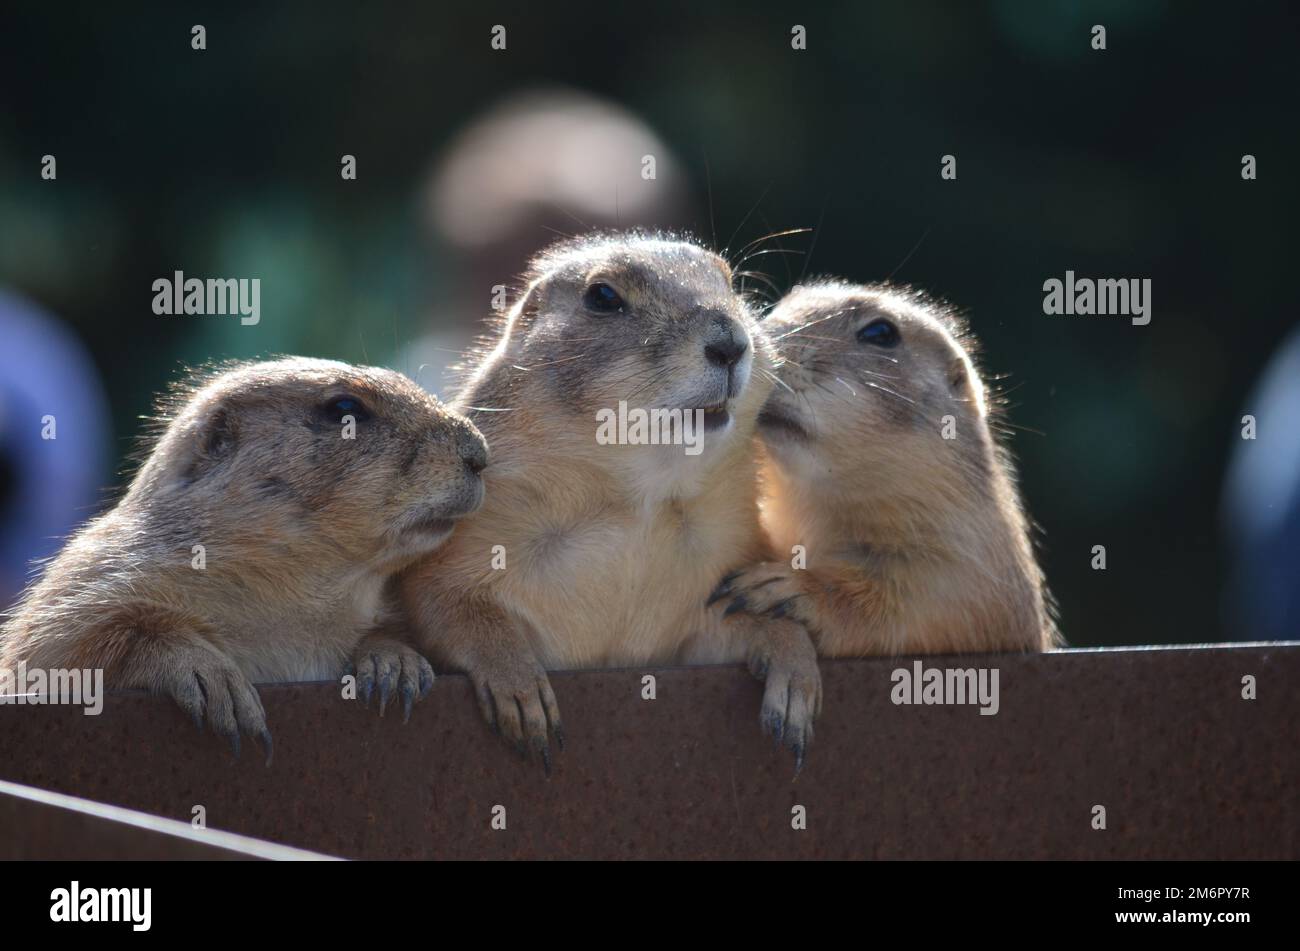 Three prairie dogs talking to each other Stock Photo